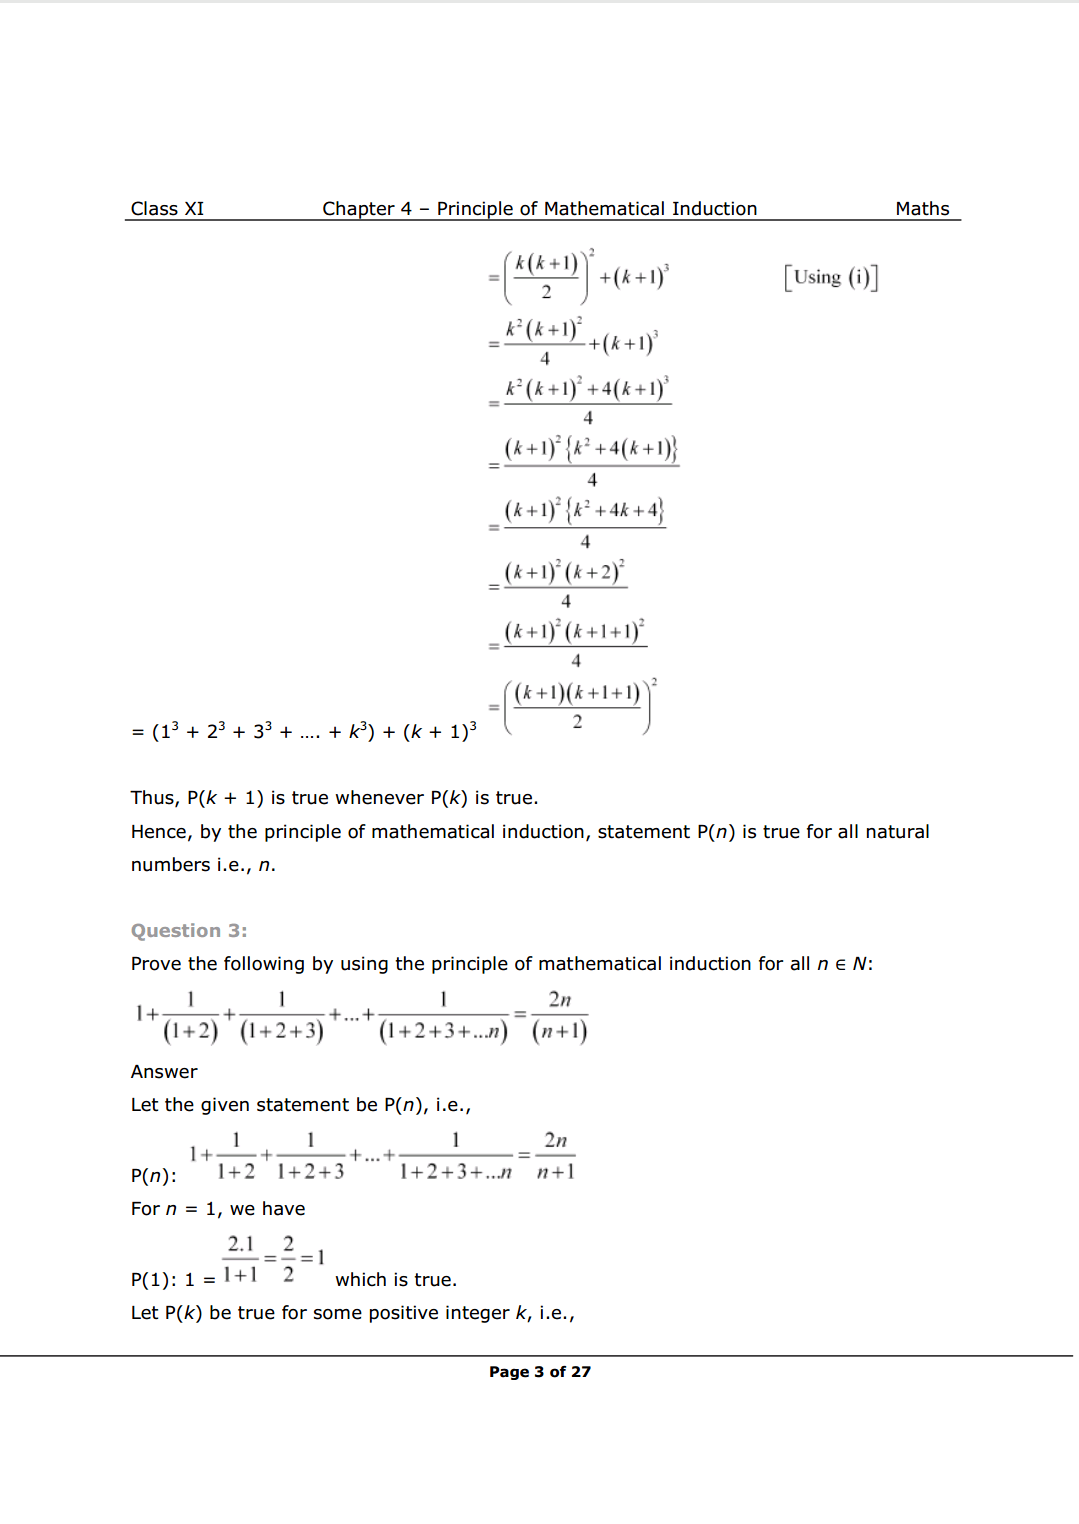 Class 11 Maths Chapter 4 Exercise 4.1 Solution Image 3